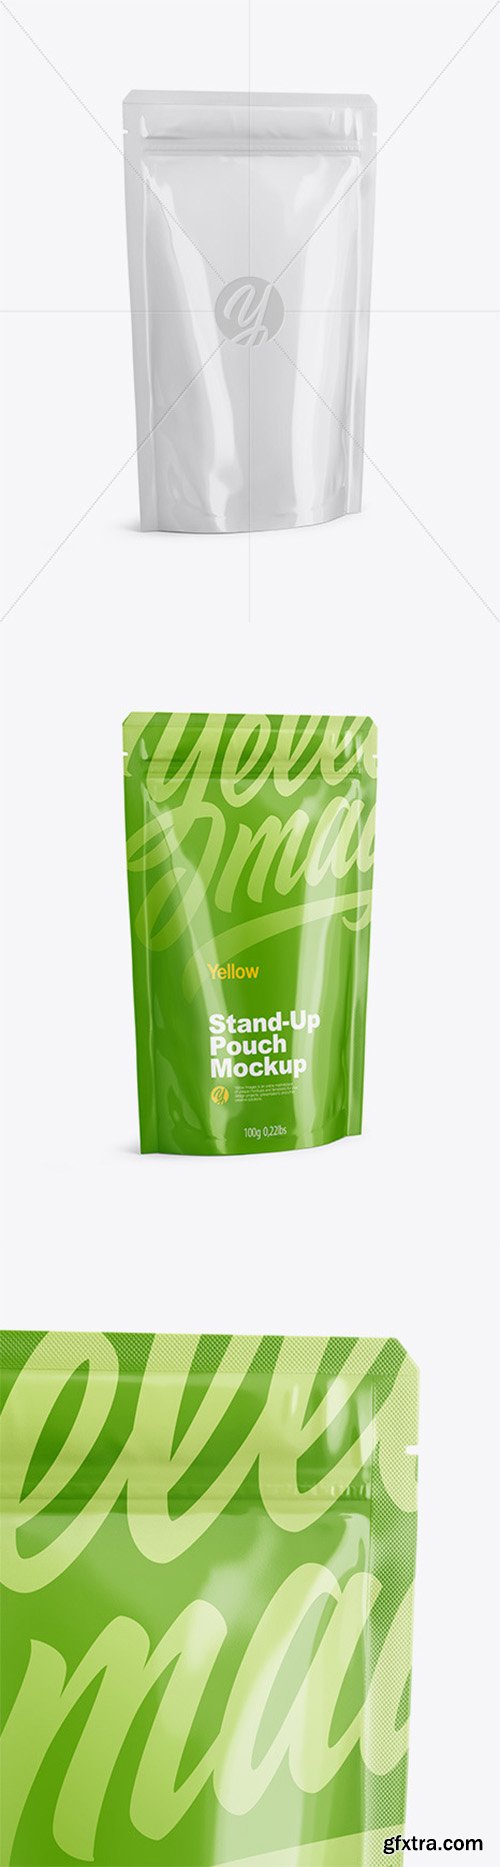 Glossy Stand Up Pouch with Zipper Mockup - Half Side View 51072